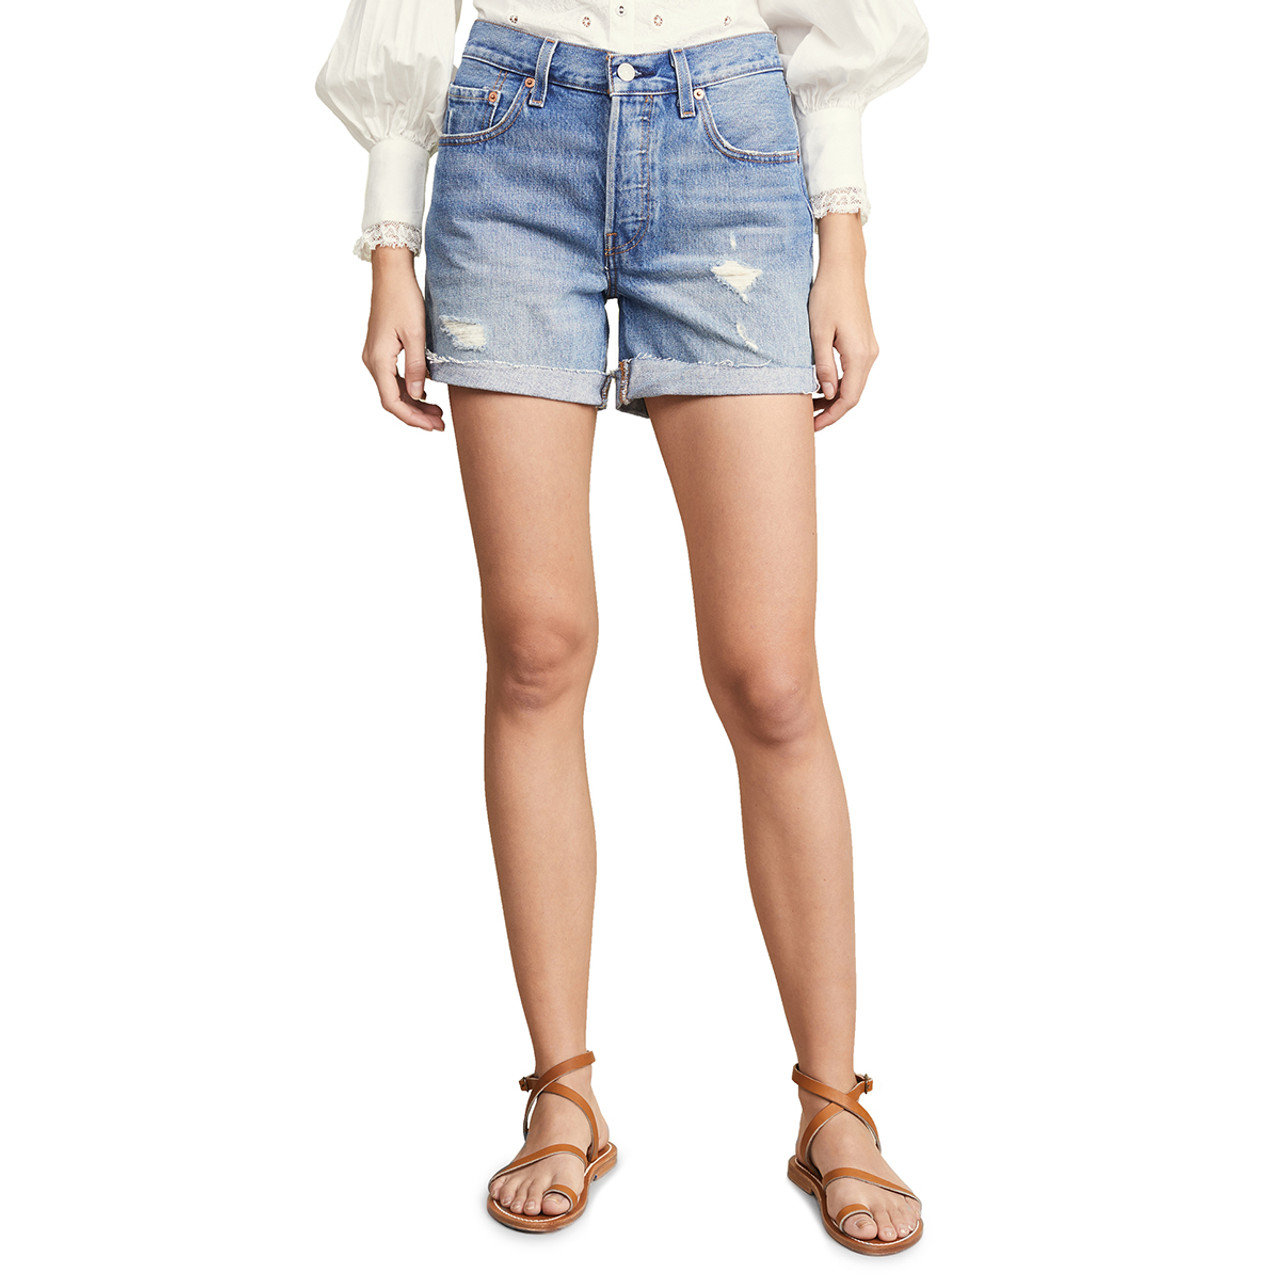 Levi's Jeans Online - 501 Non-Stretch Cutoff Shorts (Long)